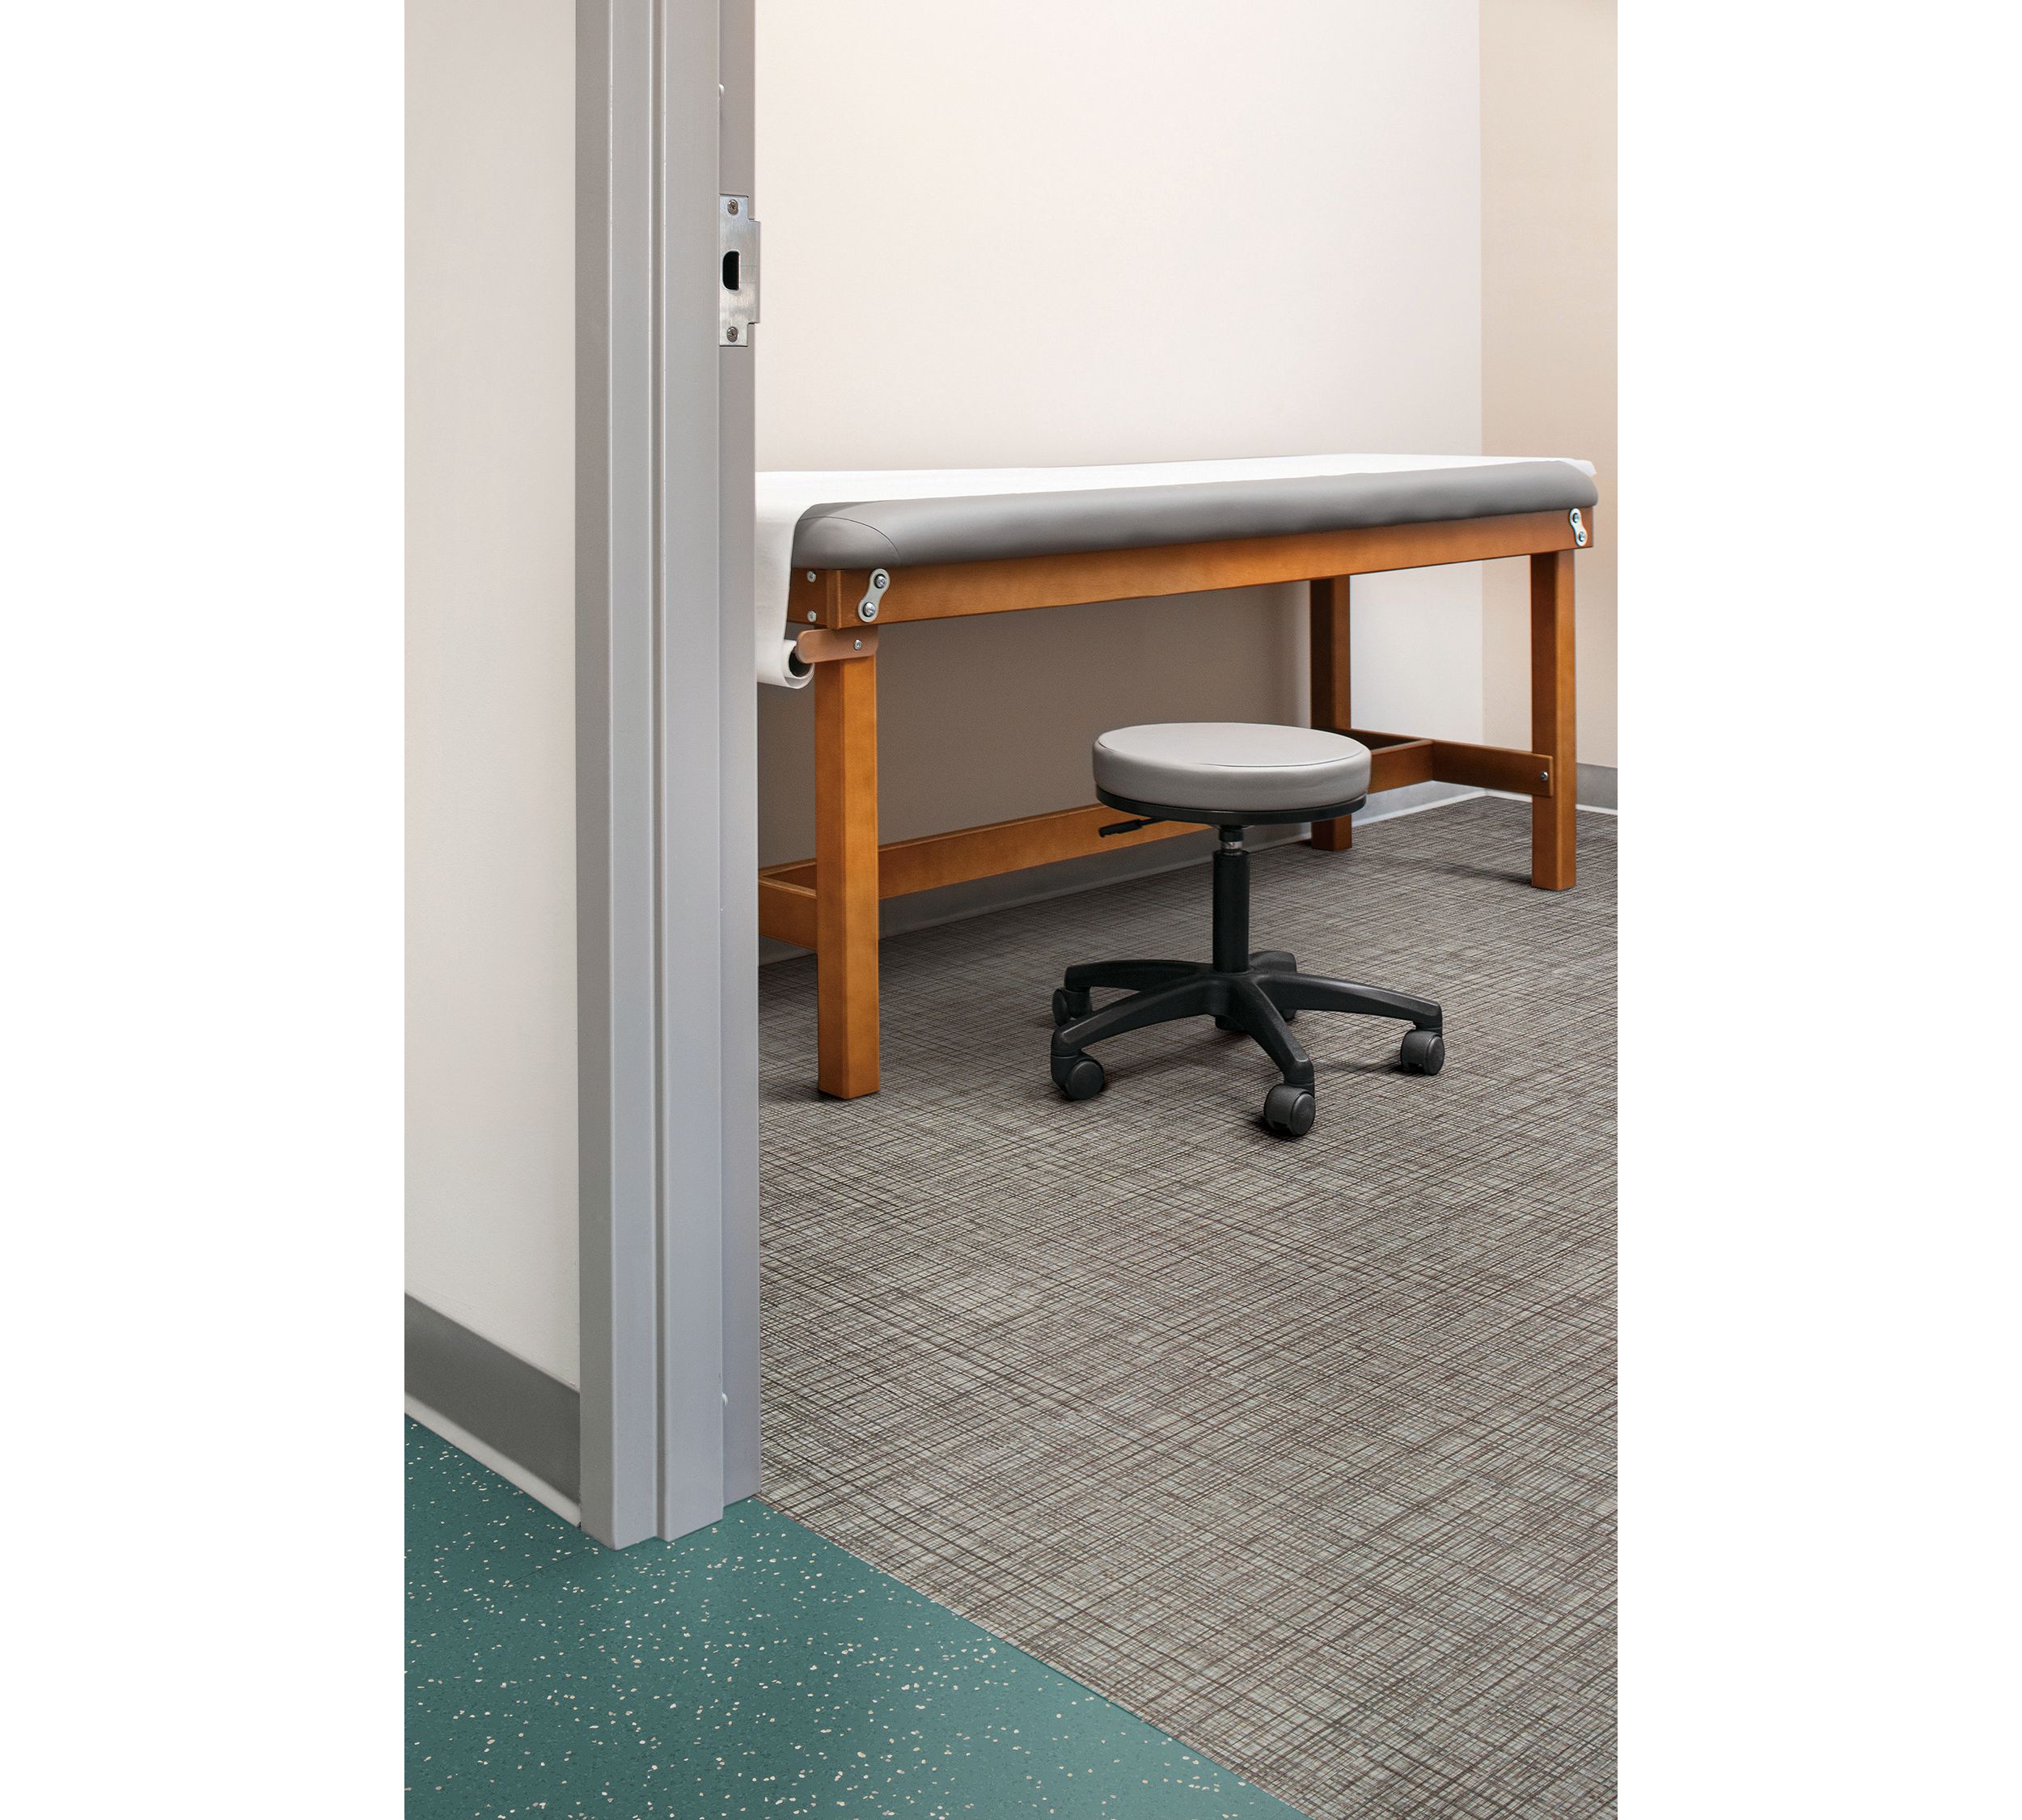 Interface Criterion Classic Wovens LVT and noraplan enironcare rubber flooring in patient room with table and rolling stool número de imagen 4